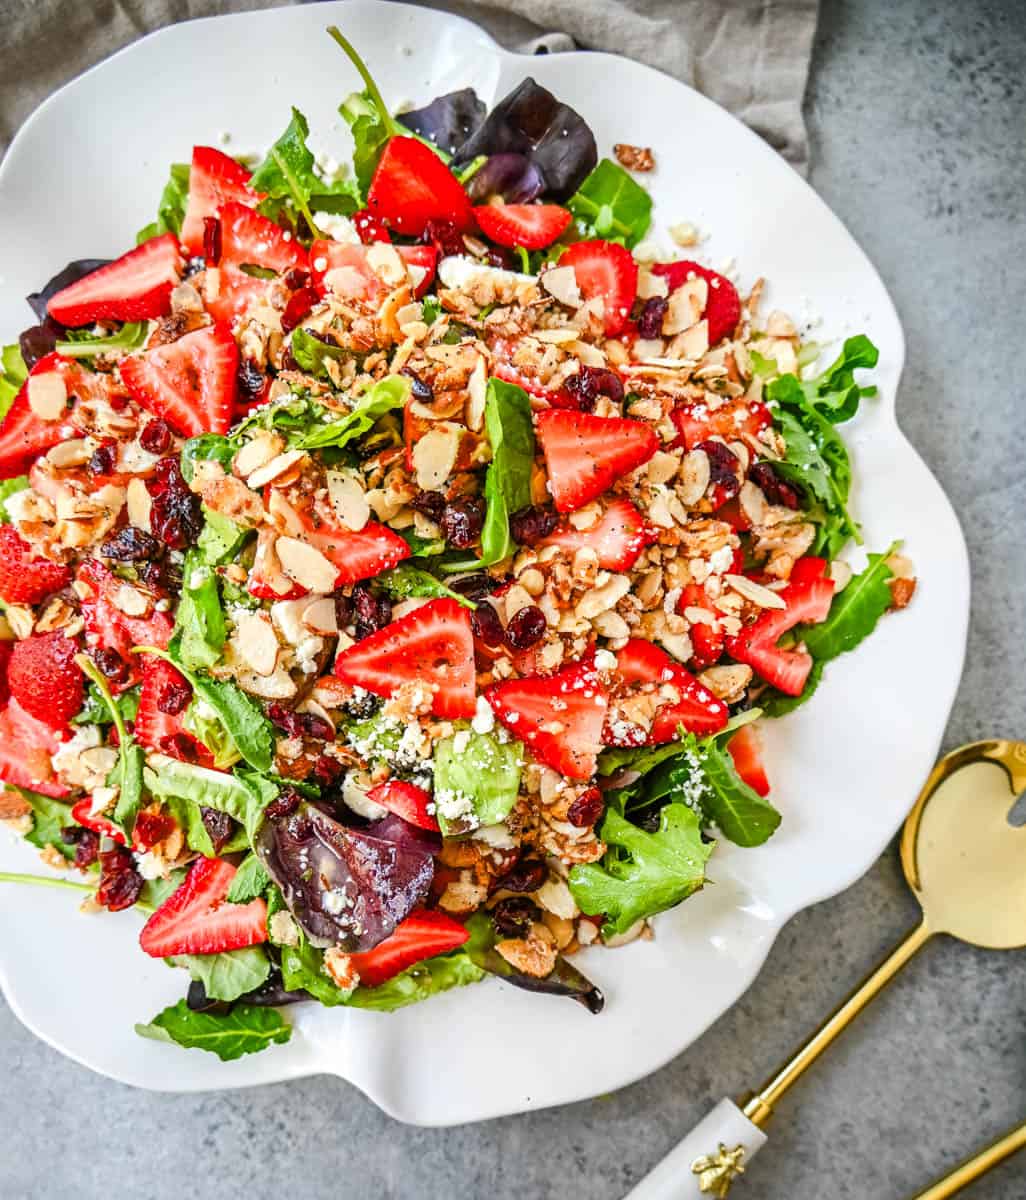 Strawberry Spring Mix Salad. This Strawberry Poppyseed Salad is made with spring mix, fresh strawberries, creamy and tangy feta cheese, sugared almonds, and tossed with a sweet homemade poppyseed dressing. 